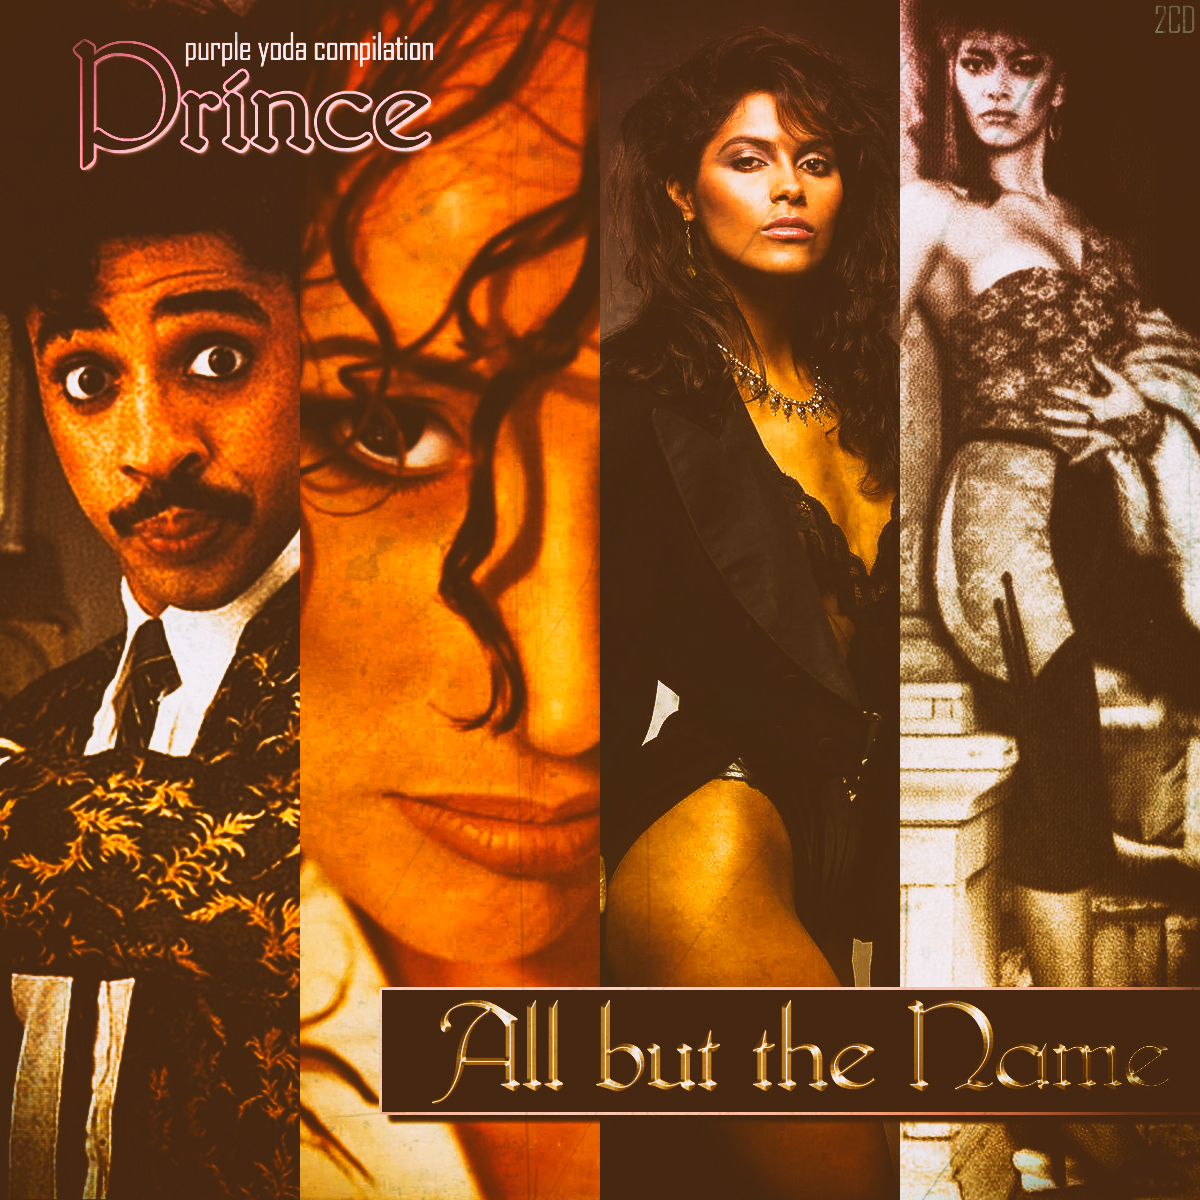 V.A - All but the Name (Ft. Prince)